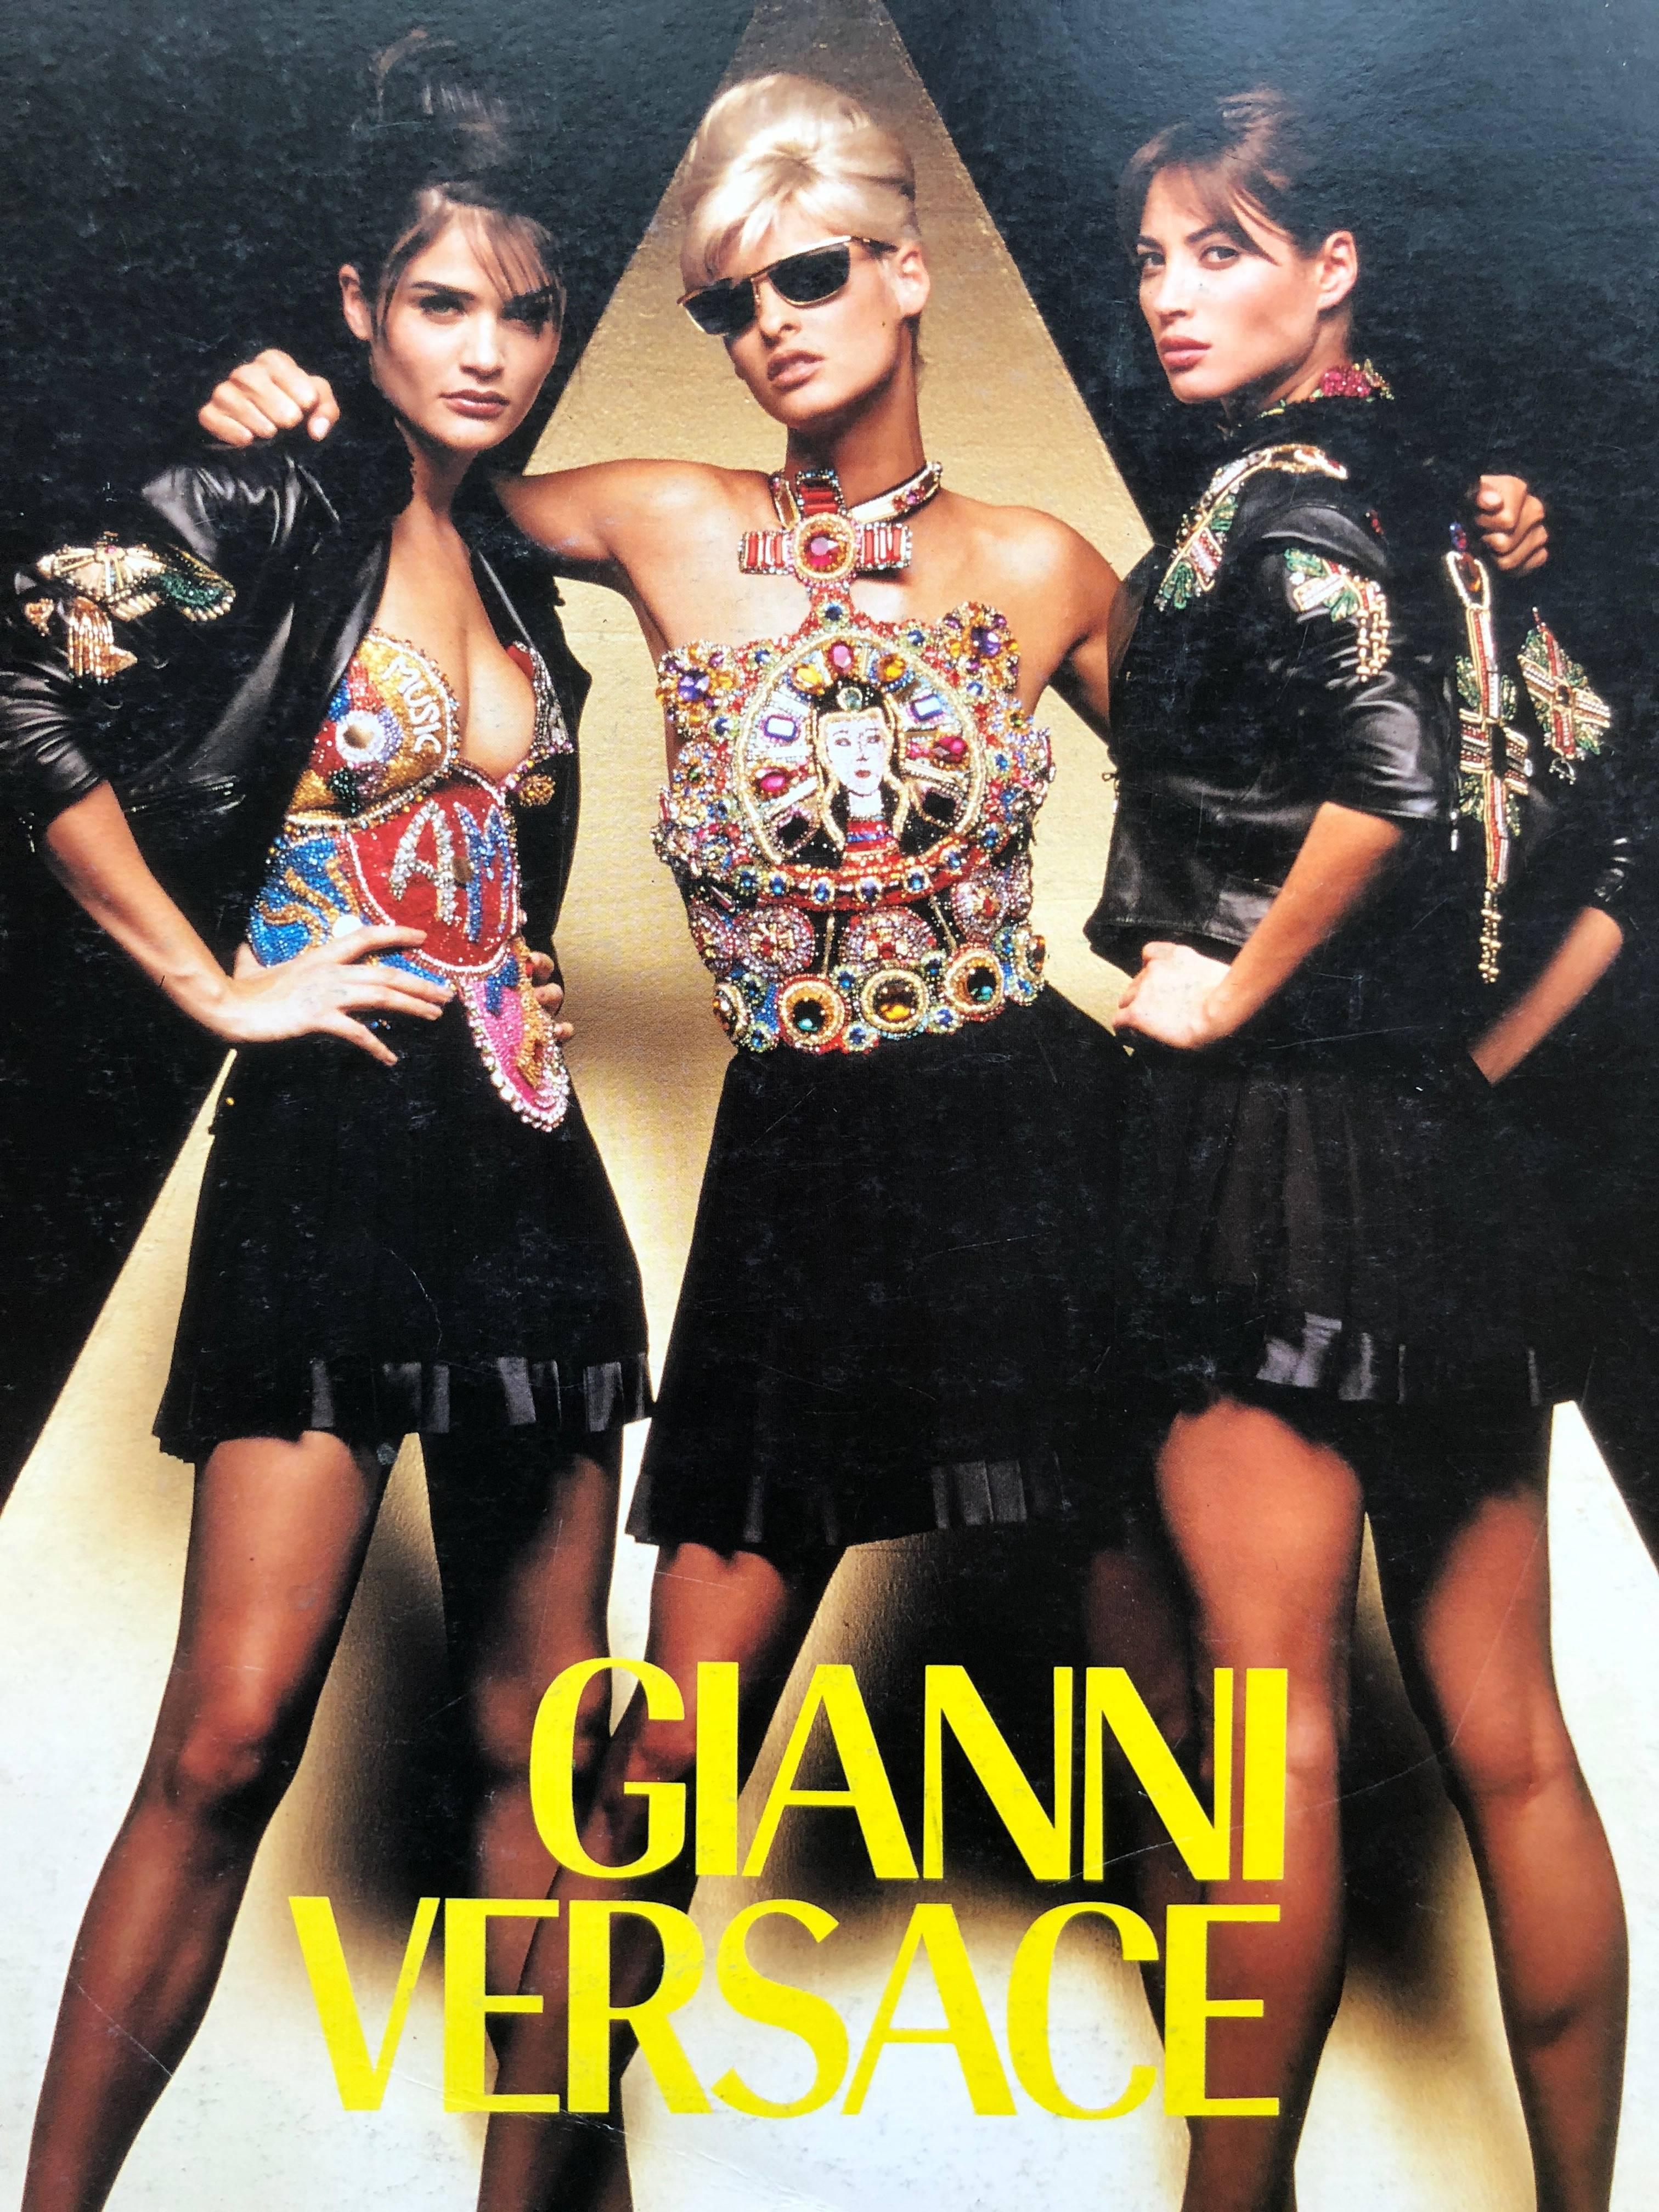 Gianni Versace Couture Book No.21 Autumn 1991 by Herb Ritts Supermodels.
Gianni Versace documented every collection in the beginning of his career , hiring the best photographers and stylists.
The is from the 1991 collection with all the Supermodels